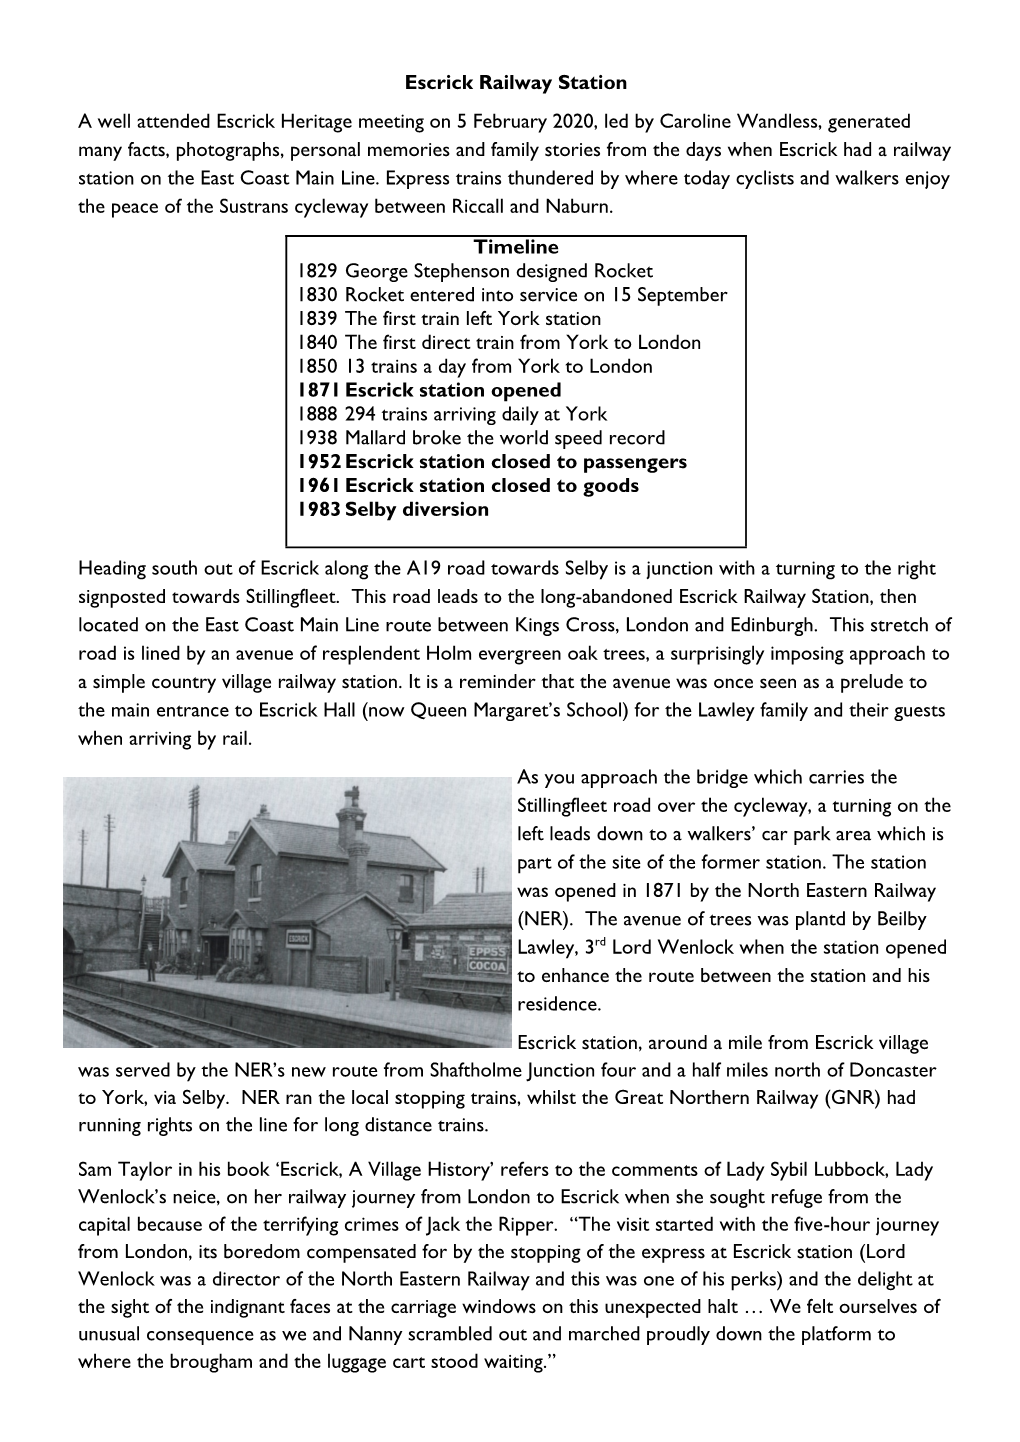 Escrick Station and the Railway